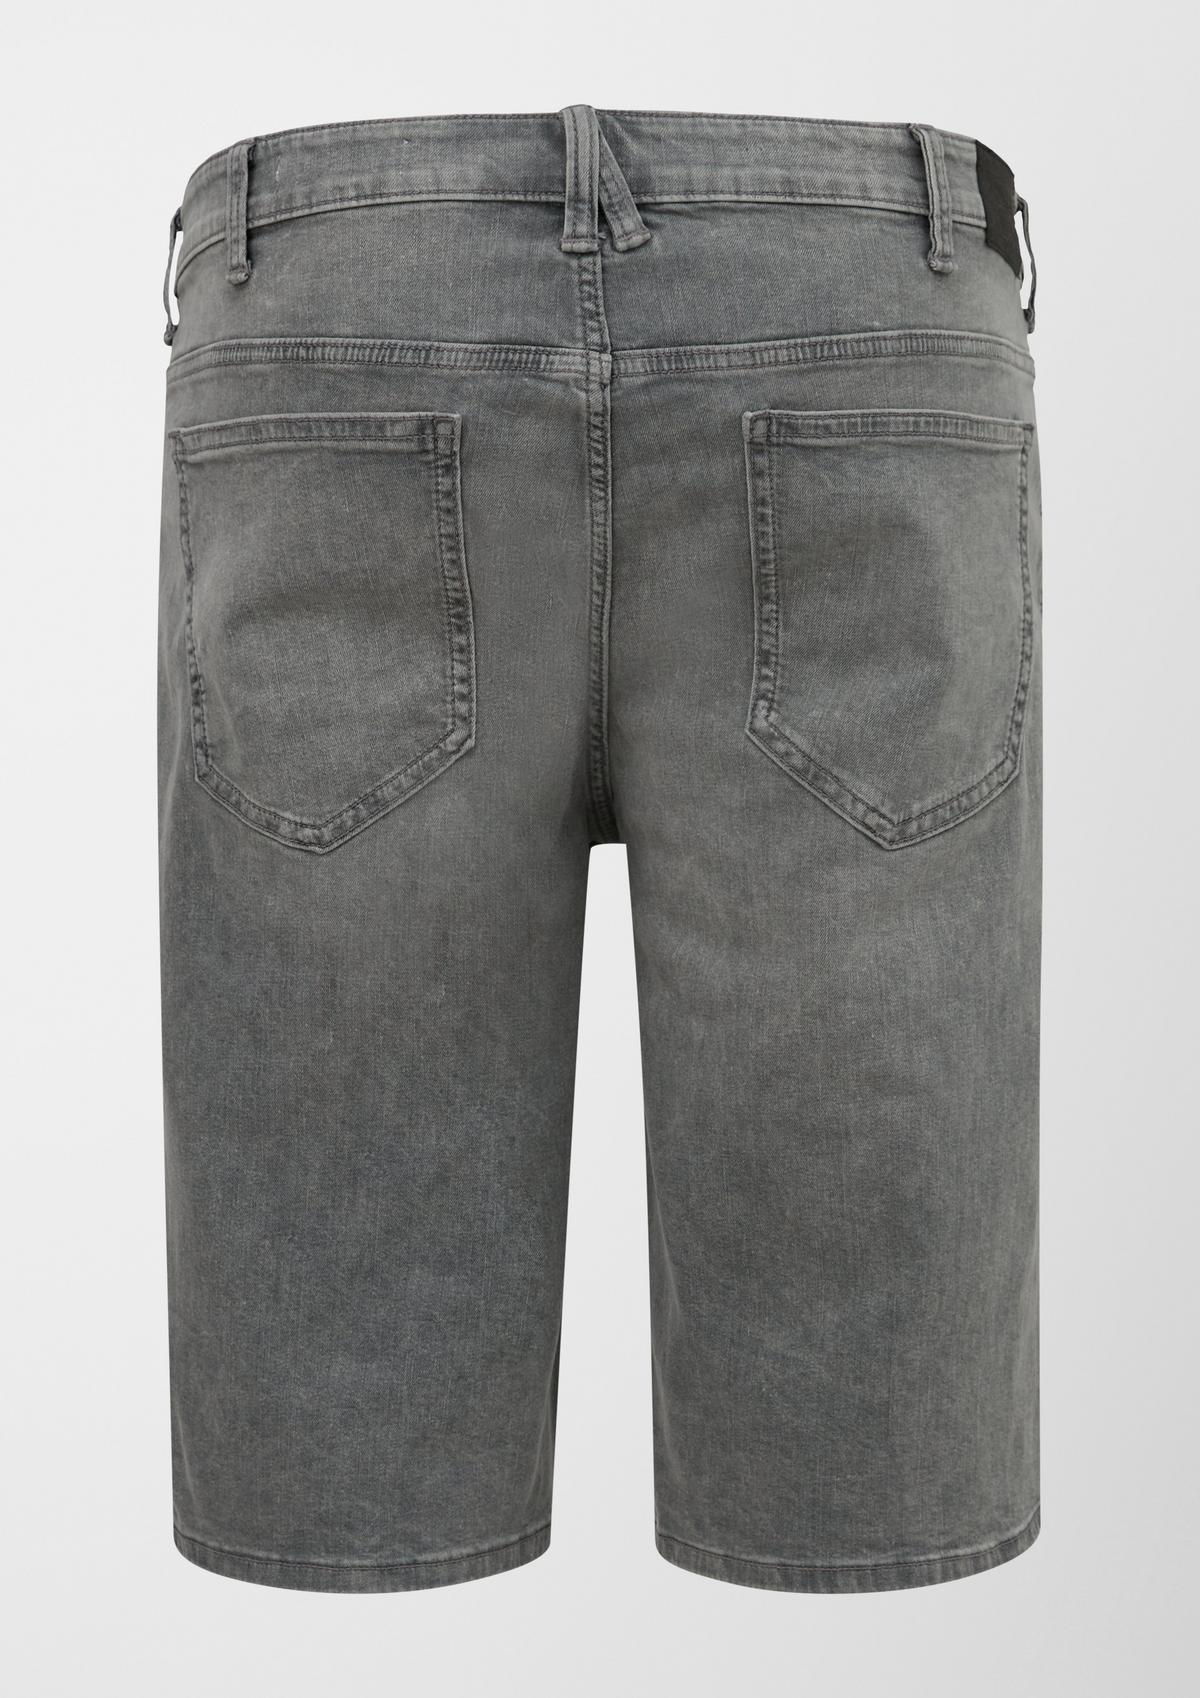 s.Oliver Relaxed: denim Bermudas with a garment wash